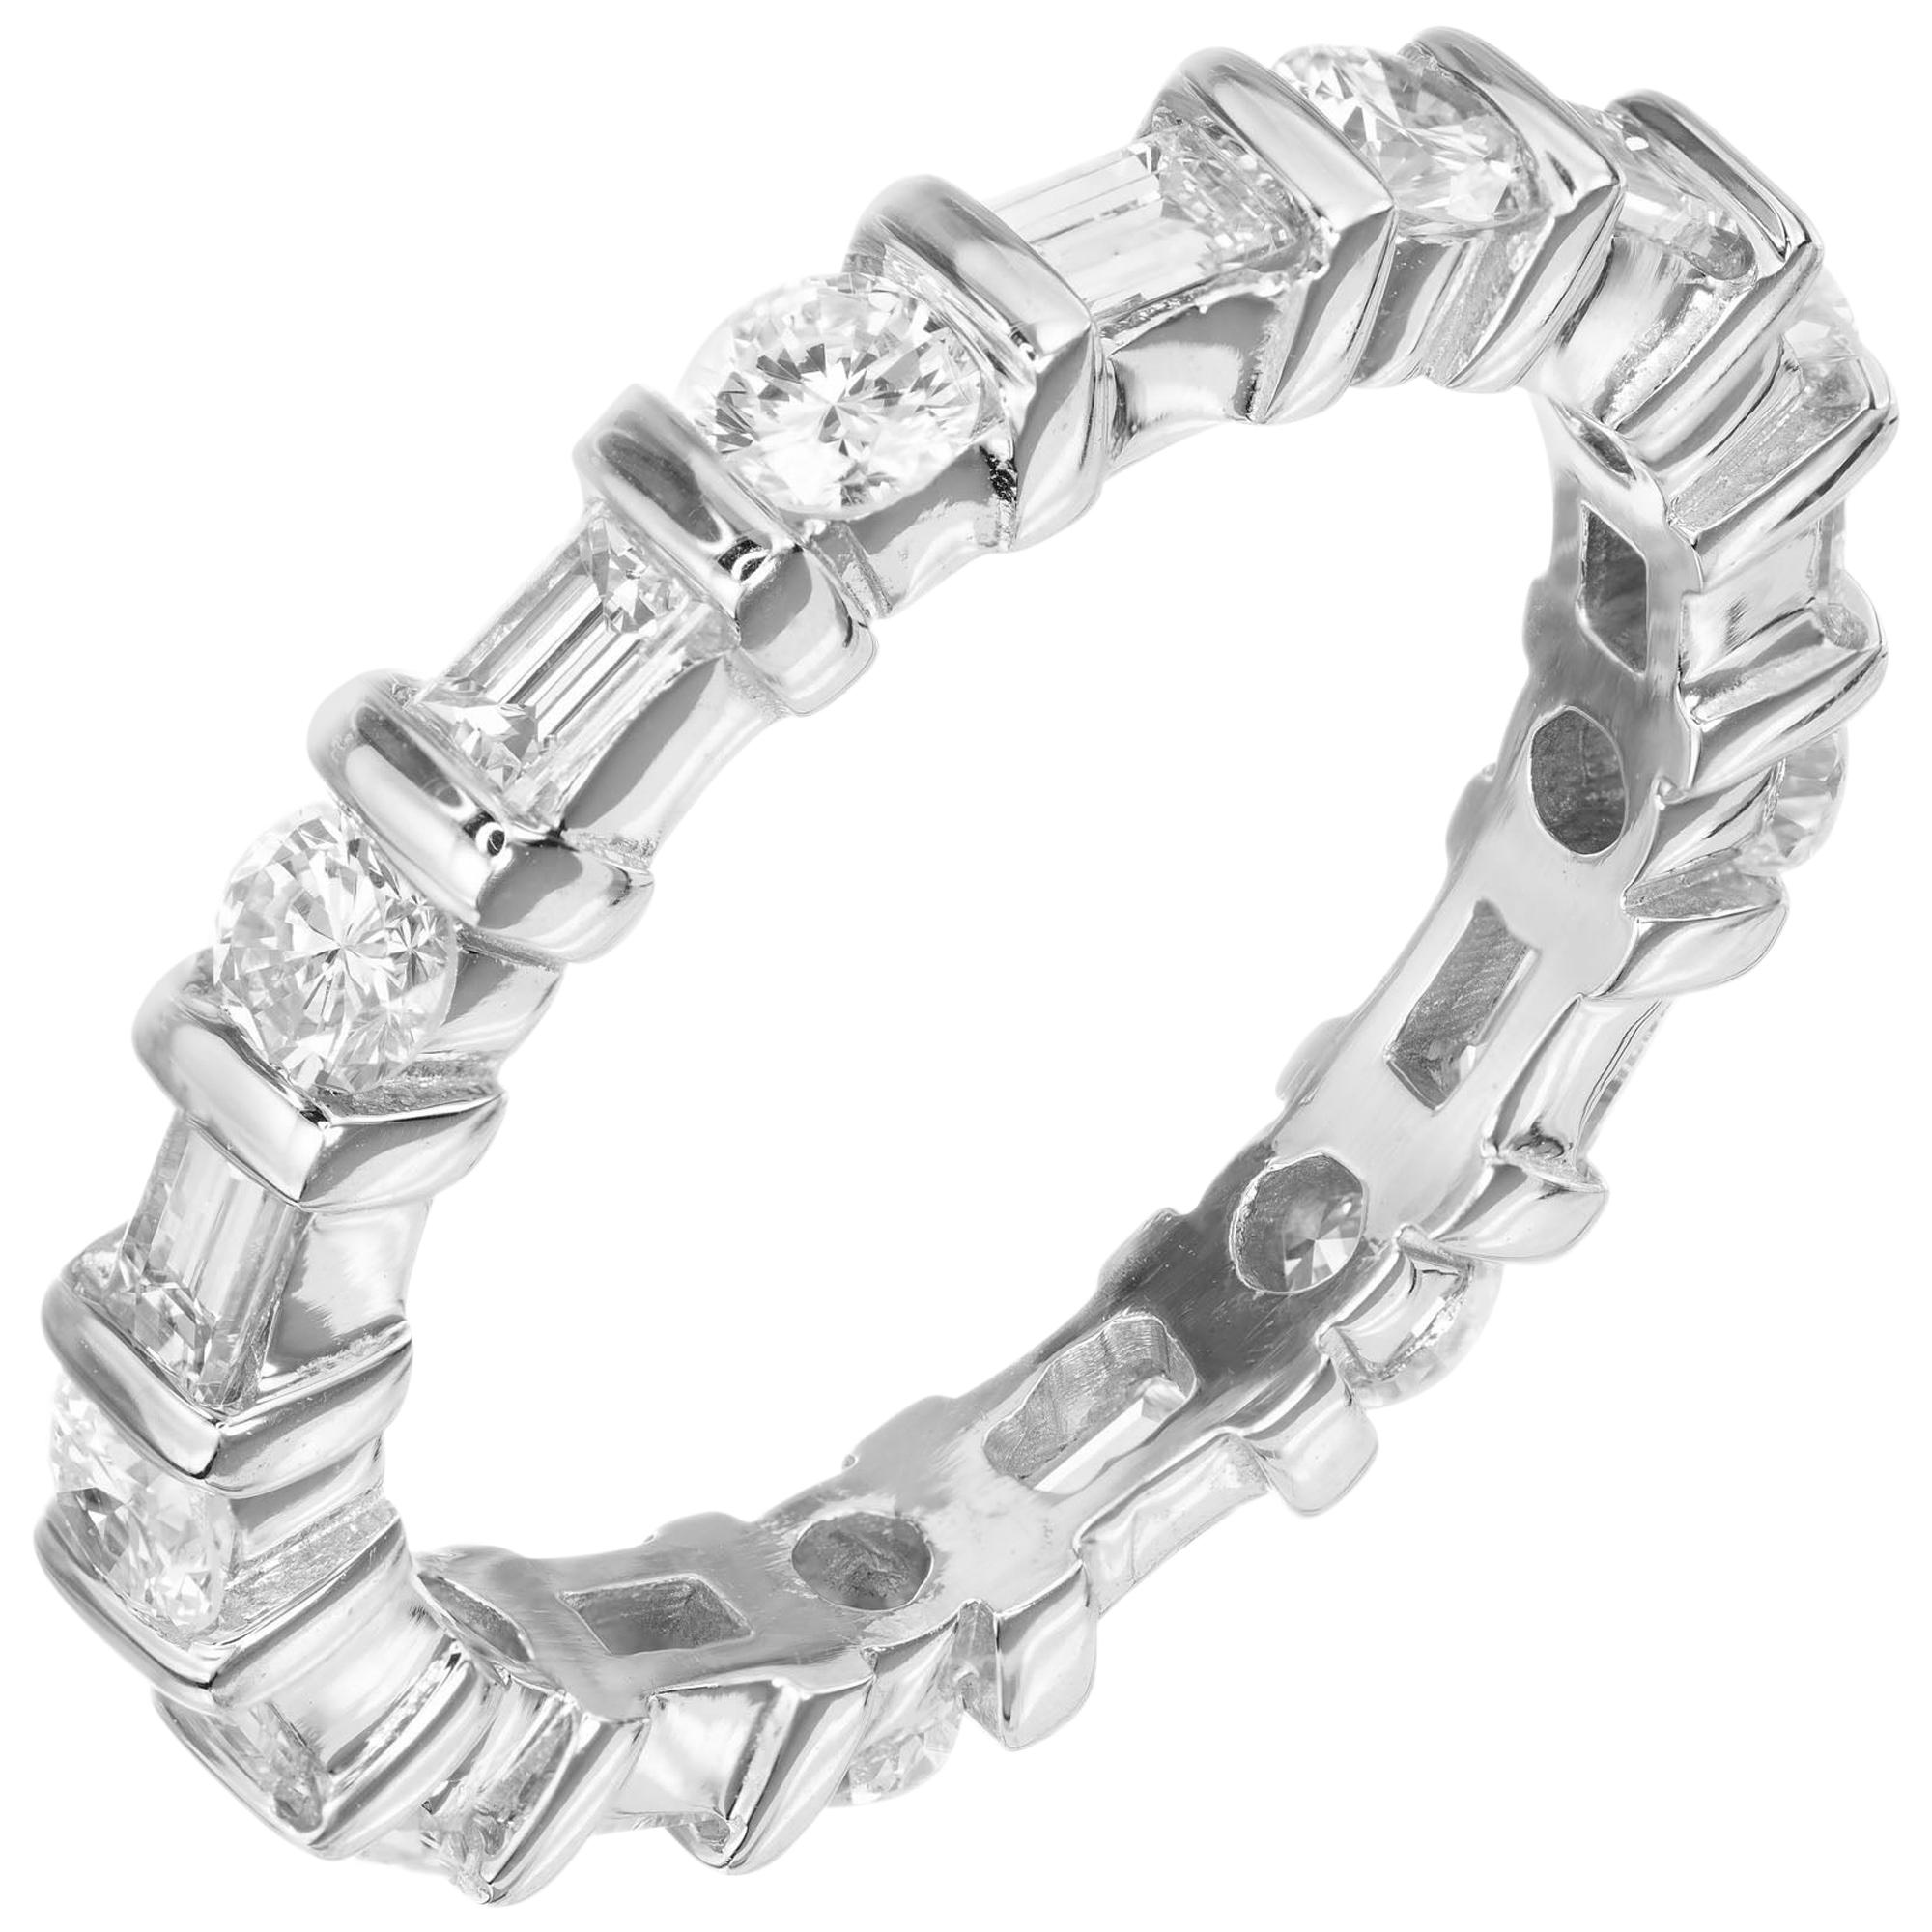 Peter Suchy 1.59 Carat Diamond White Gold Eternity Wedding Band Ring For Sale